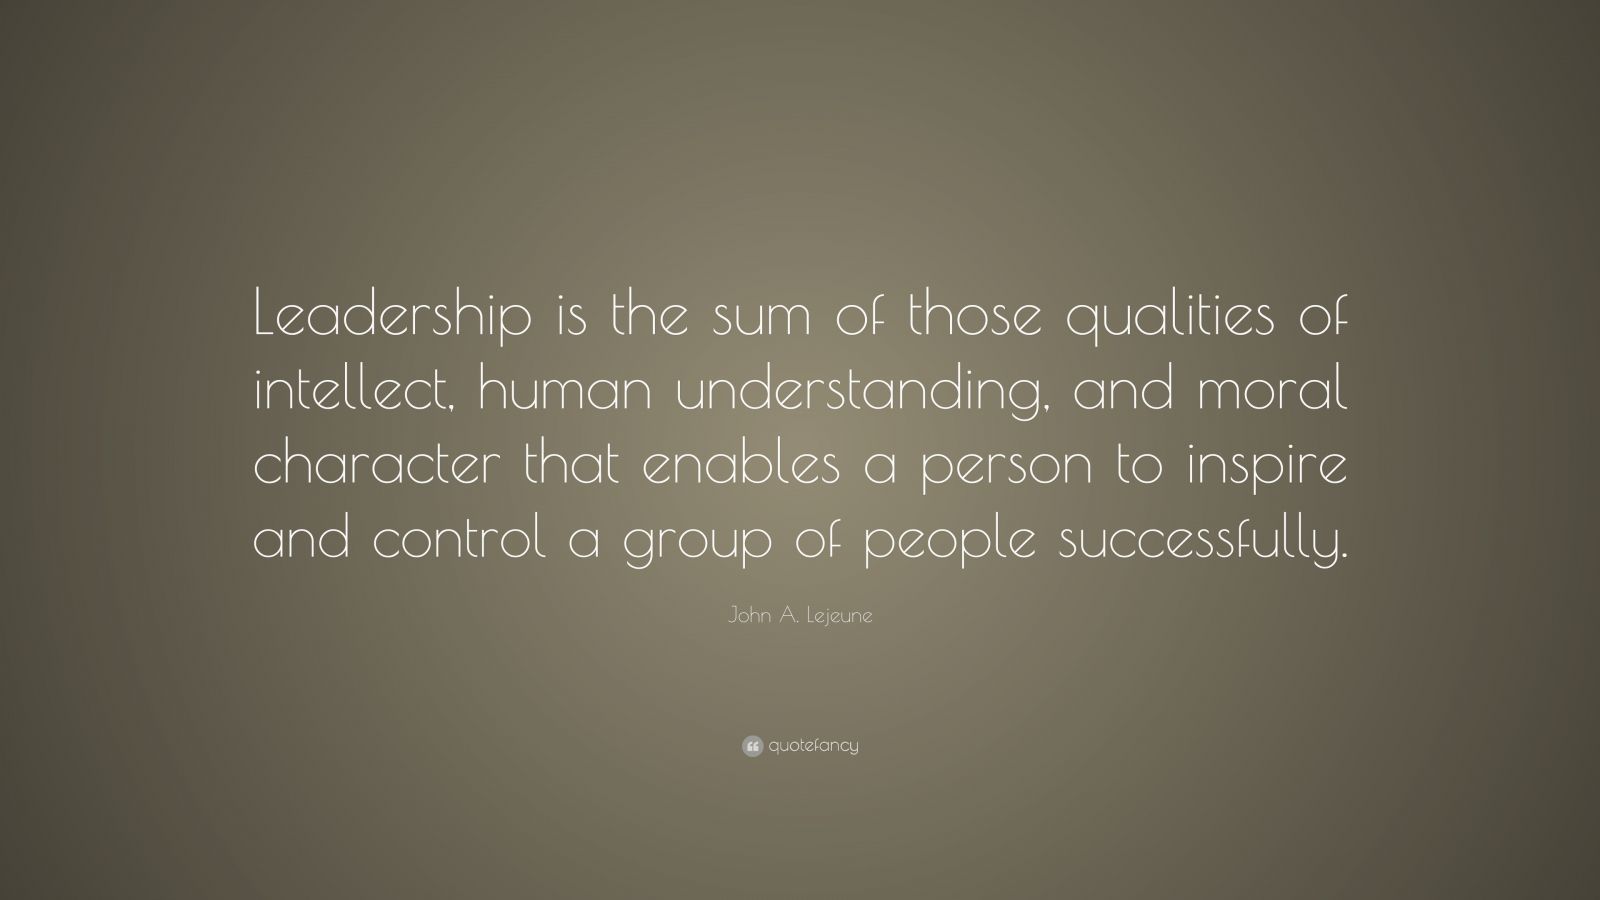 John A. Lejeune Quote: “Leadership is the sum of those qualities of ...